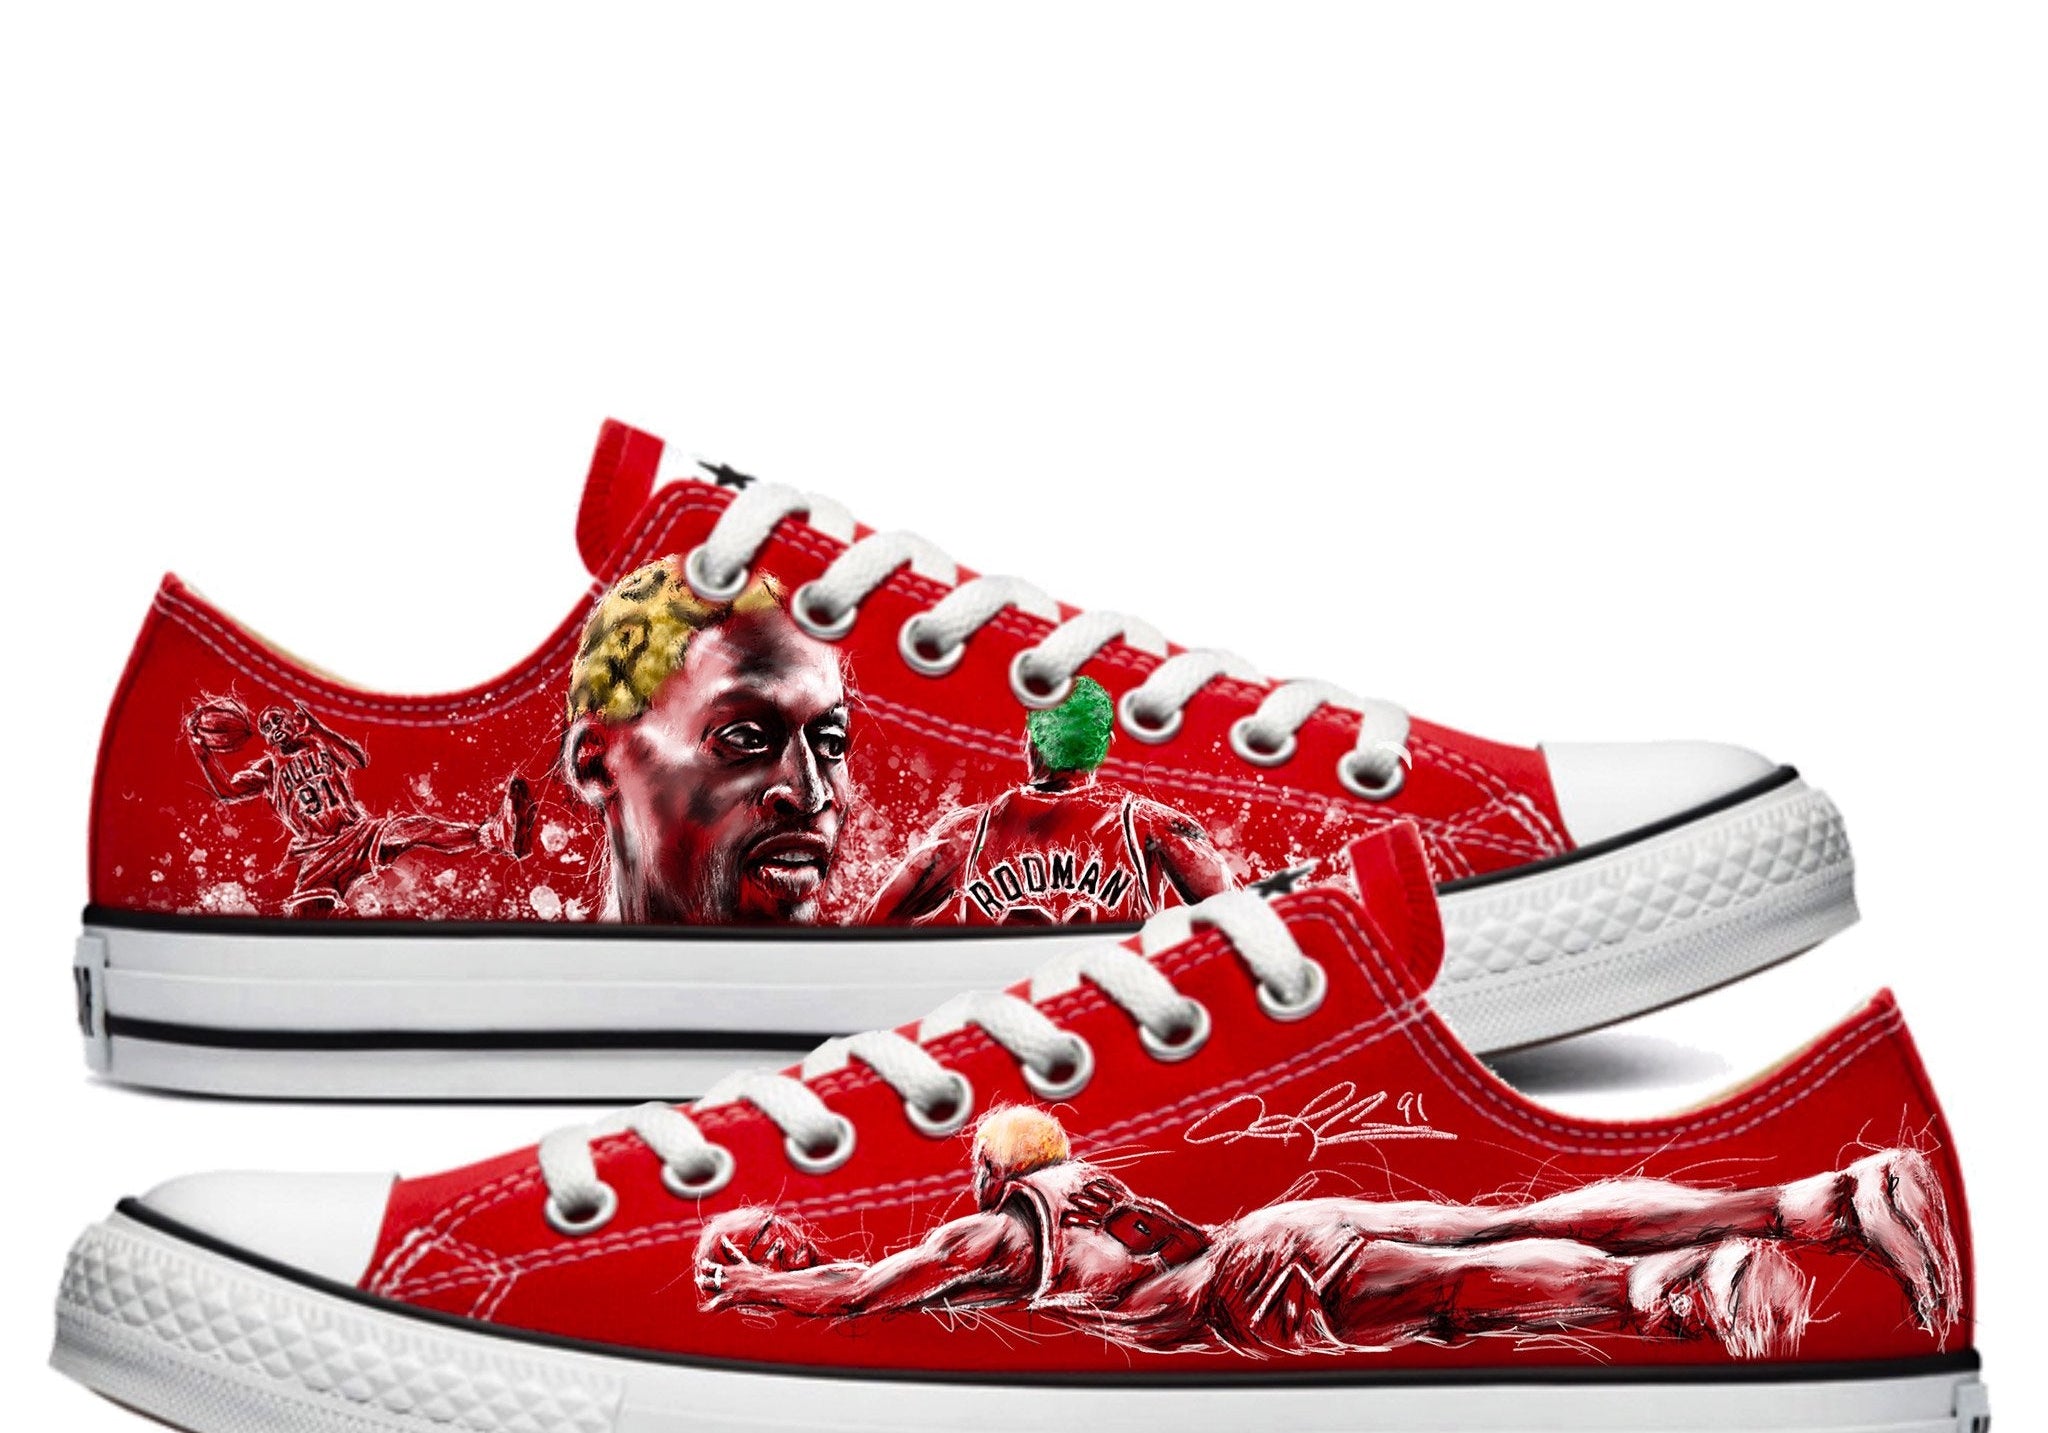 Dennis Rodman | "All Out" | Low Top Converse - Androo's Art